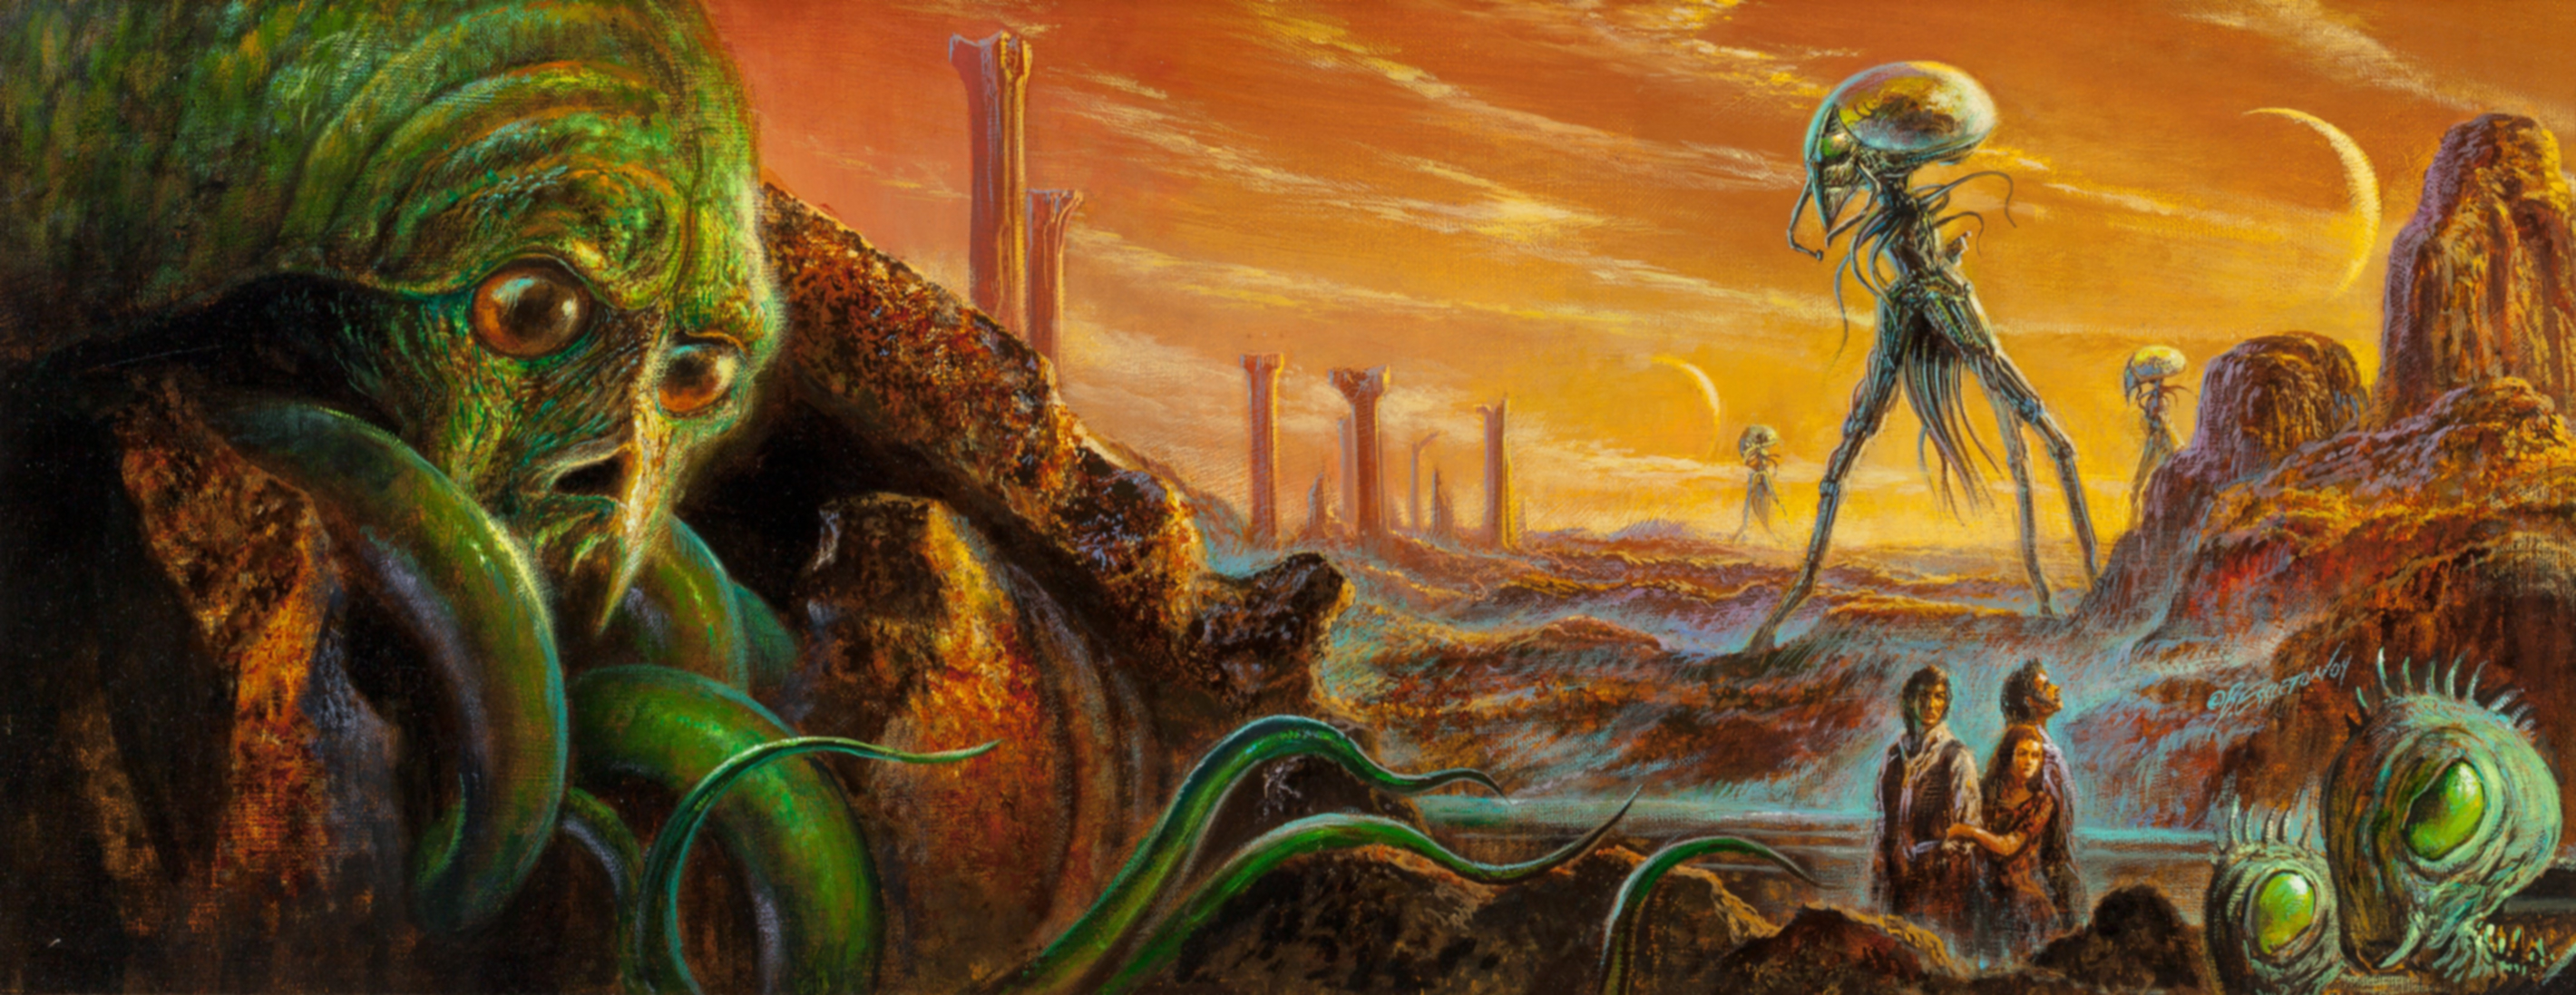 General 2840x1097 Bob Eggleton science fiction Pulp Magazine Martian War of the Worlds Moon painting retro science fiction